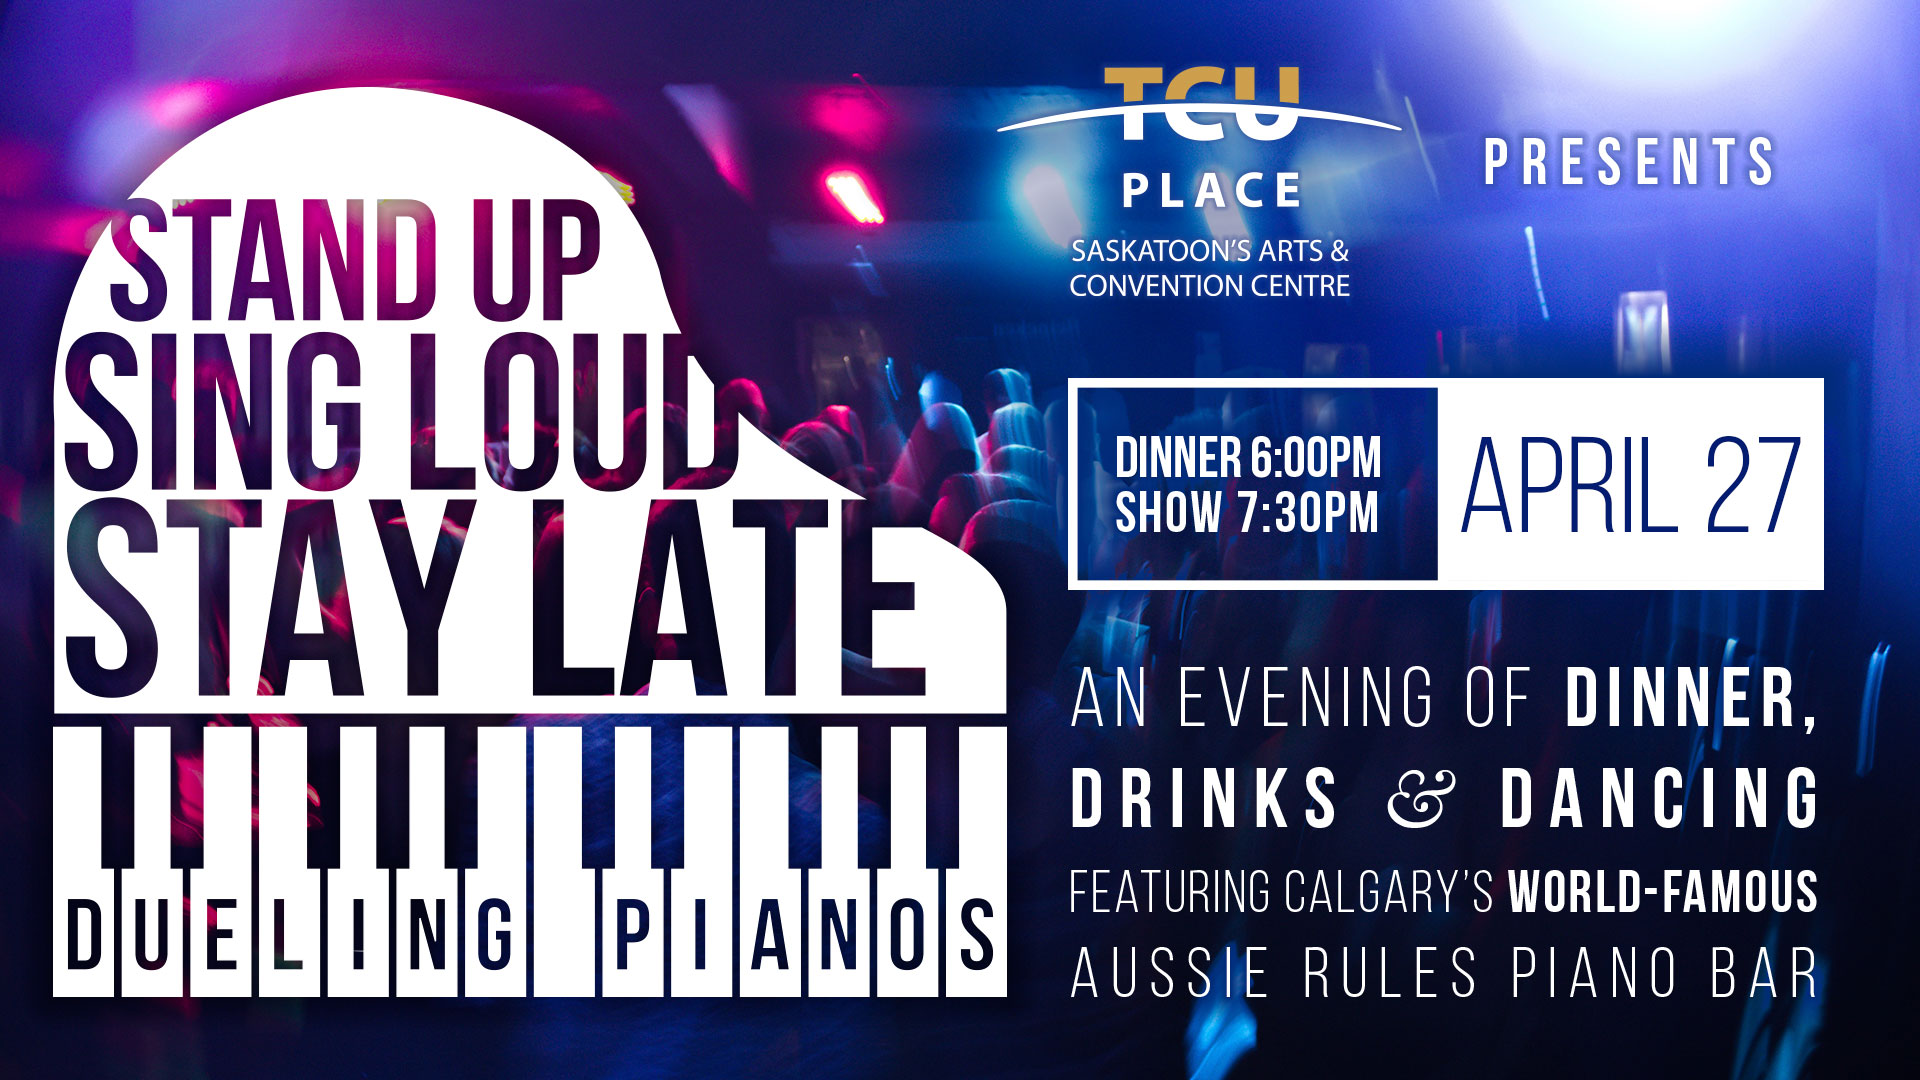 Dueling Pianos - an evening of dinner, drinks and dancing featuring Calgary's world-famous Aussie Rules Piano Bar - Learn More